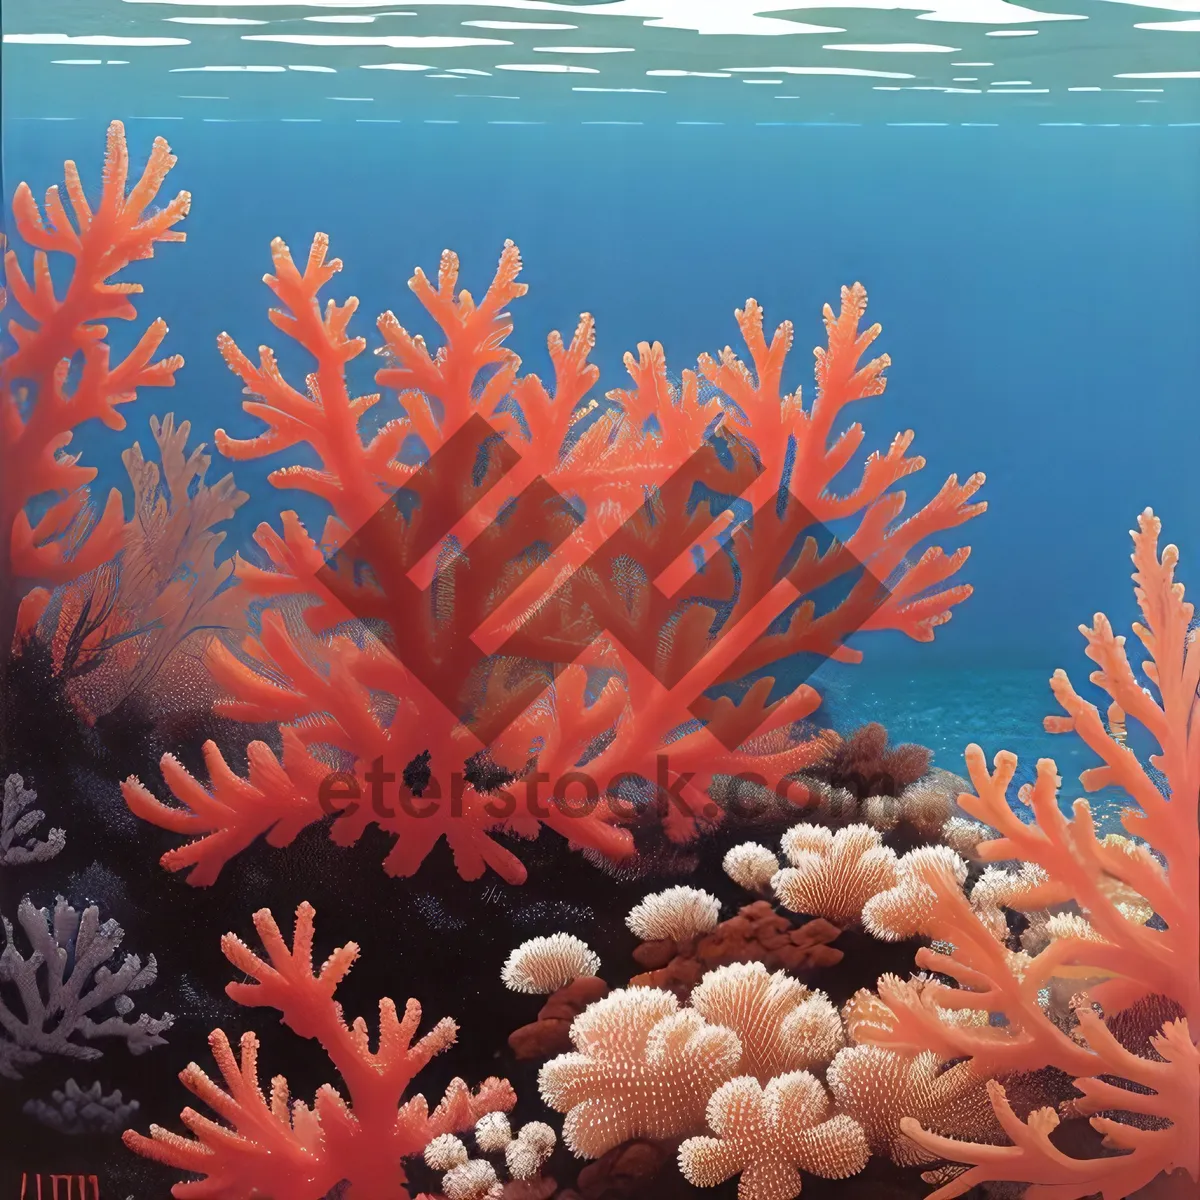 Picture of Tropical coral reef with colorful fish and feather star.